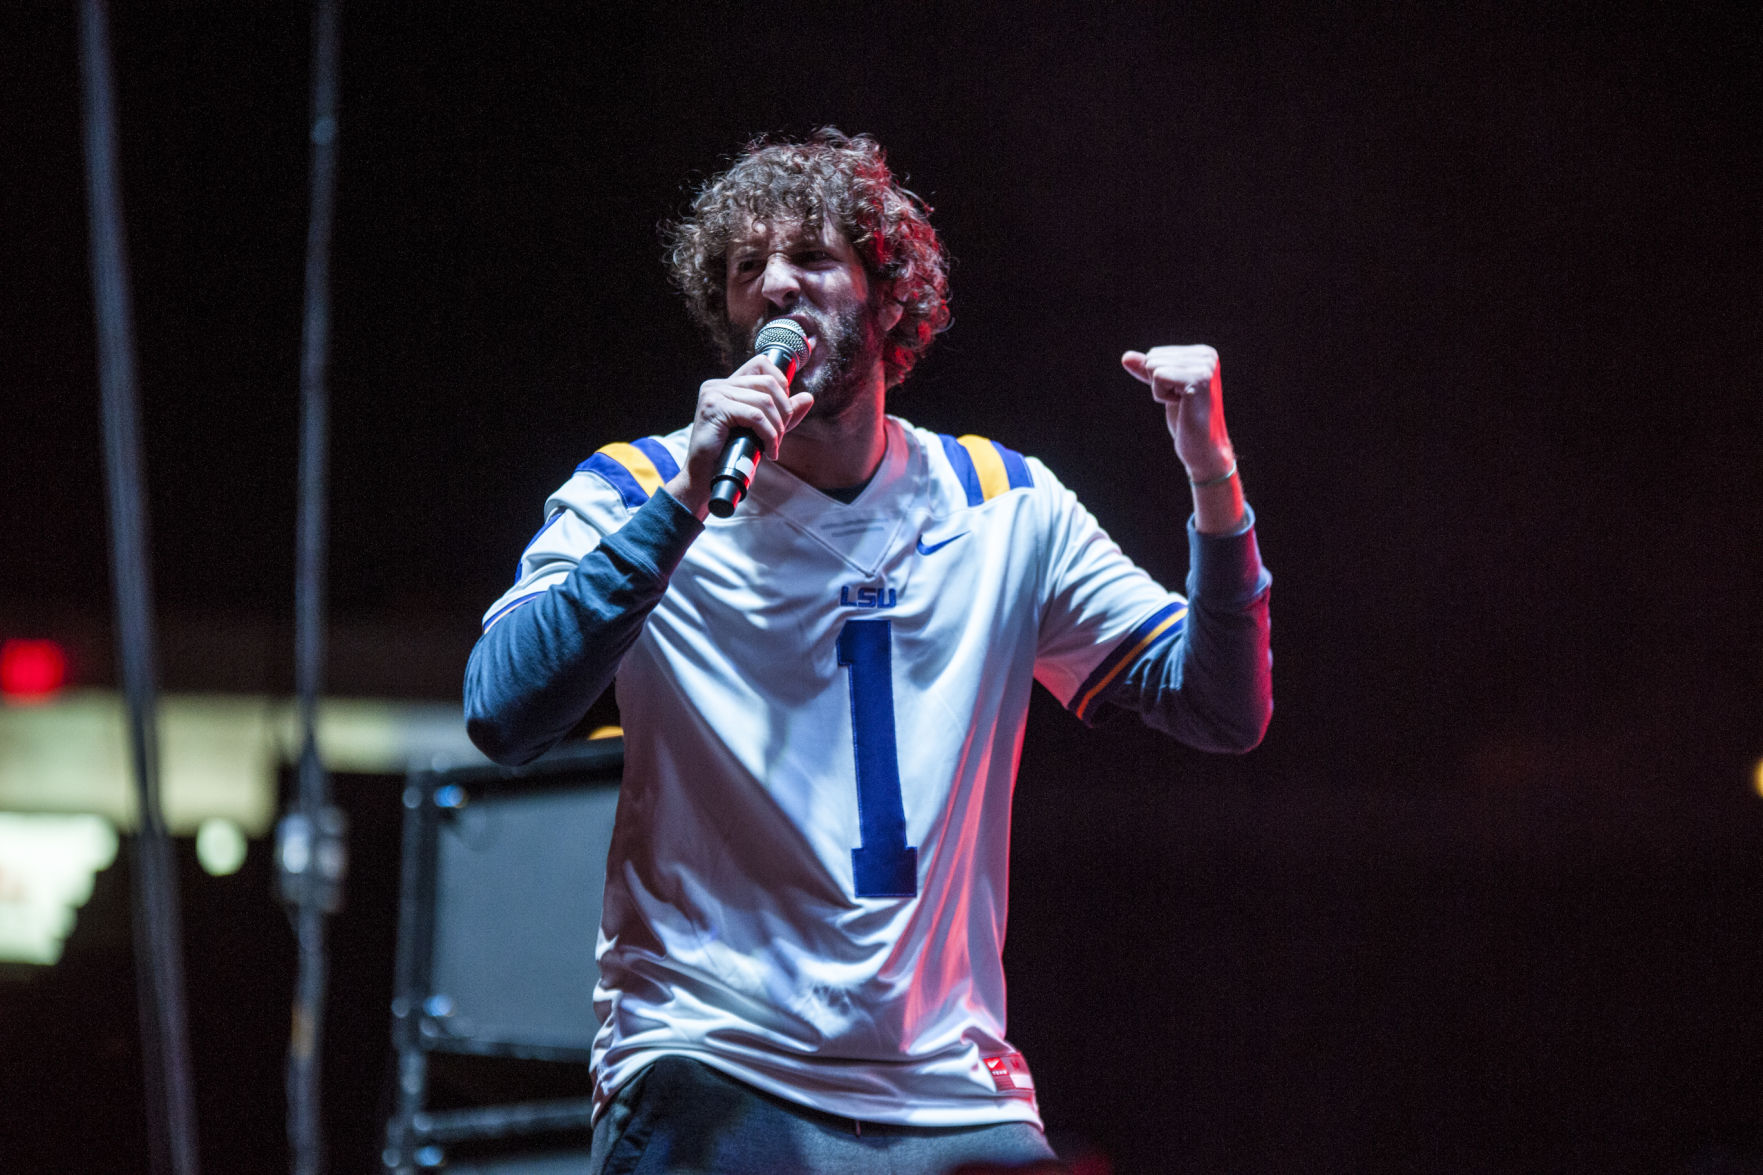 lil dicky professional rapper itunes m4a download